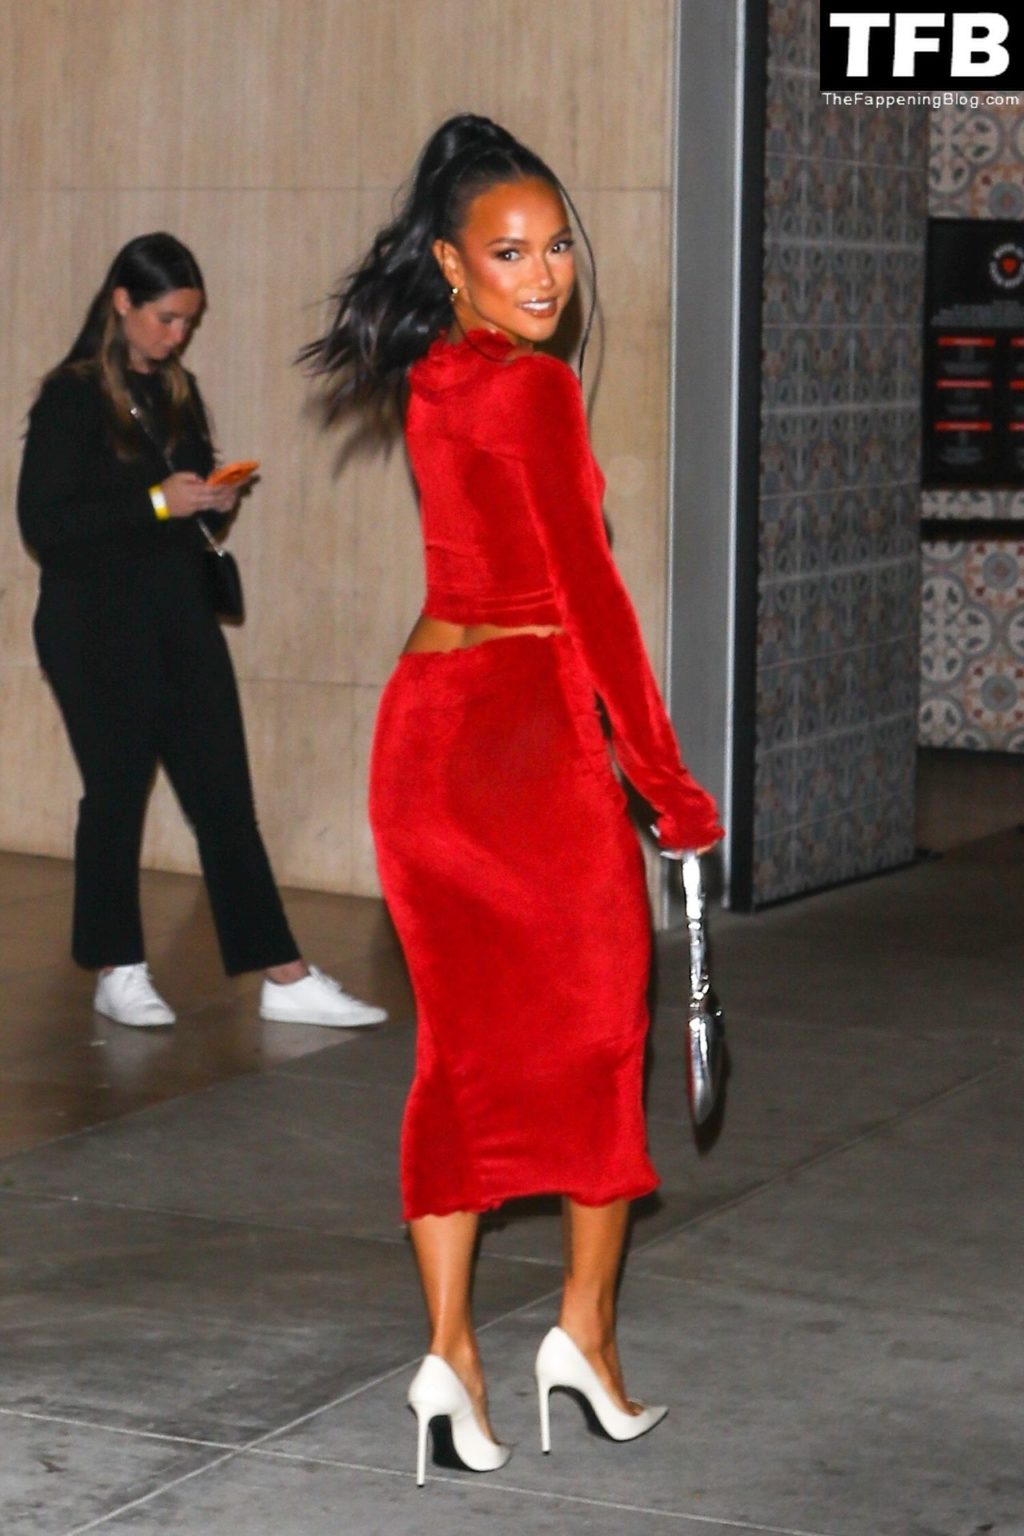 Karrueche Tran Sexy The Fappening Blog 61 1024x1536 - Karrueche Tran Shows Her Pokies in a Red Dress at The Hollywood Reporter’s Oscar Nominees Night (68 Photos)